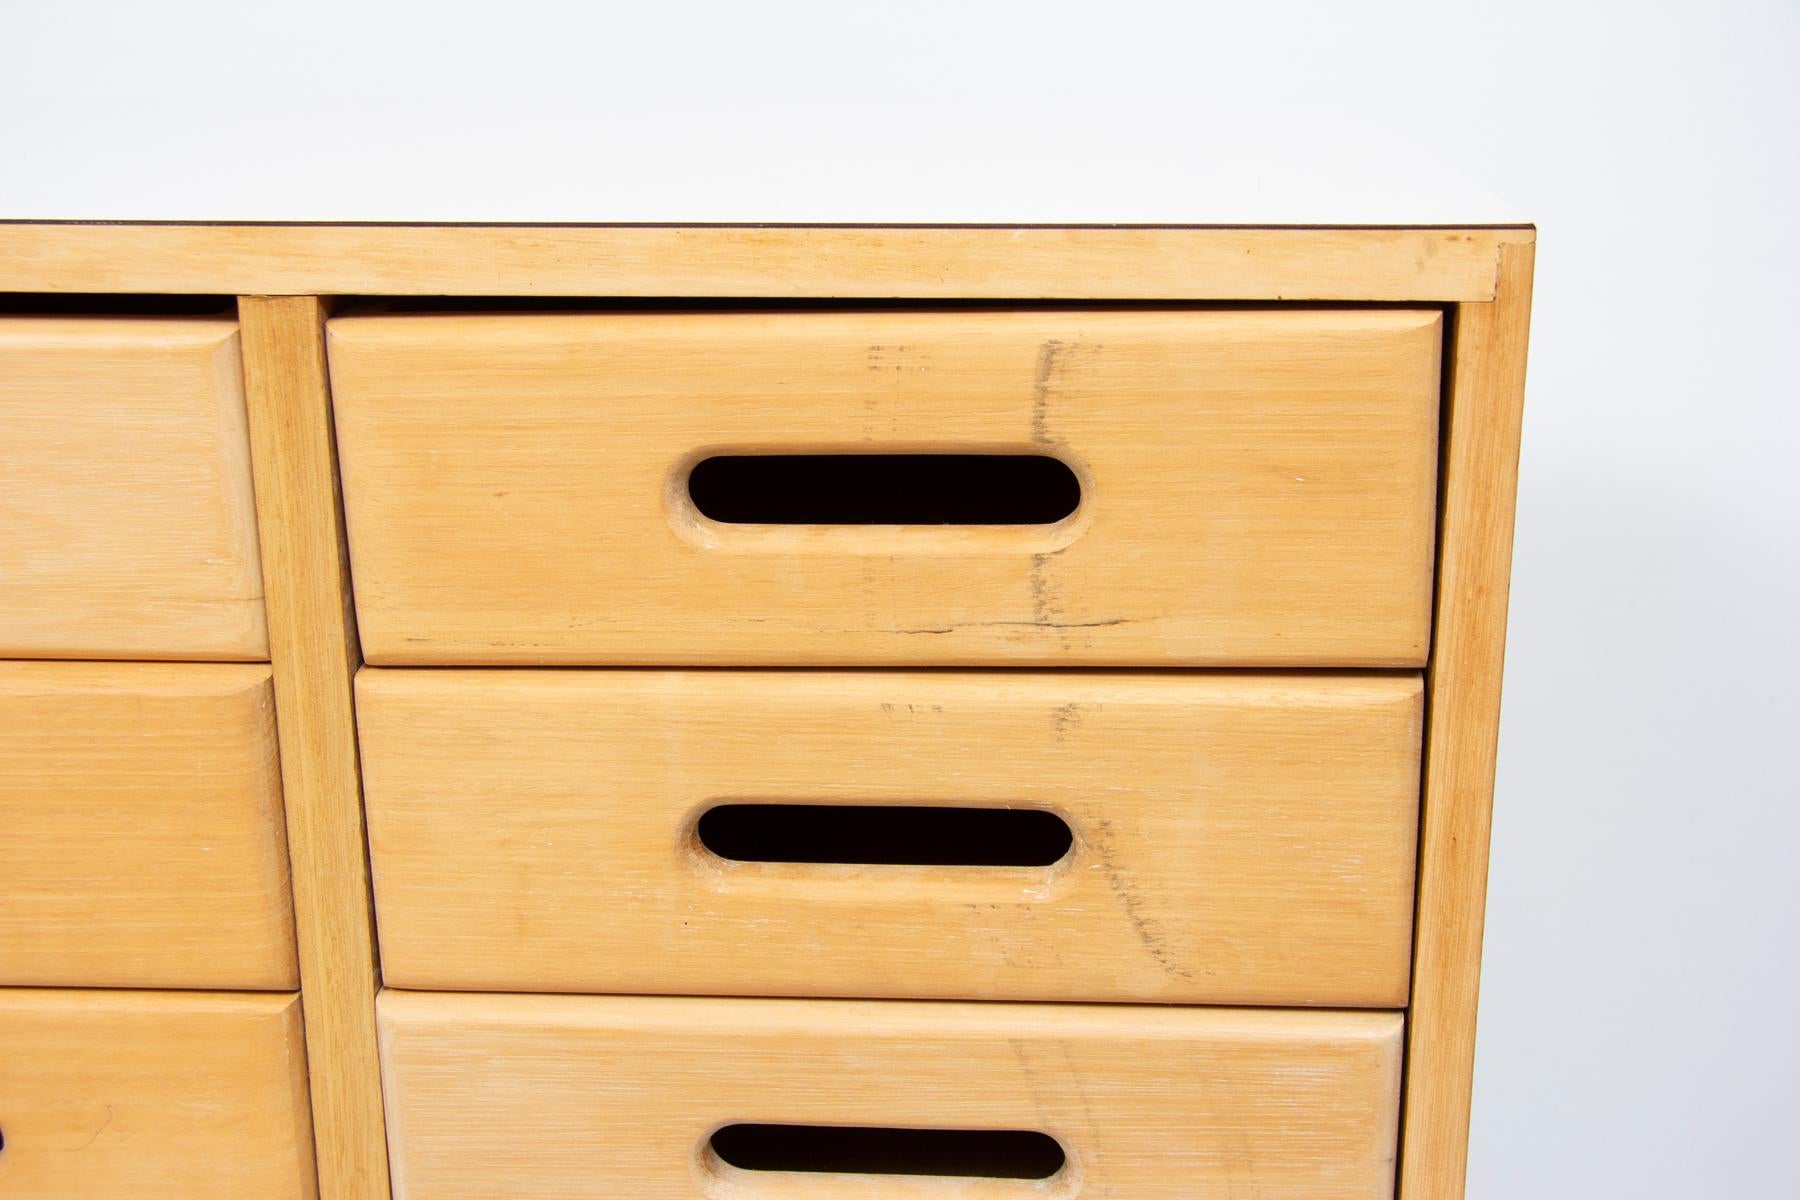 A midcentury chest of school drawers designed by James Leonard in the early 1950s for Esavian (ESA) The Educational Supply Association.